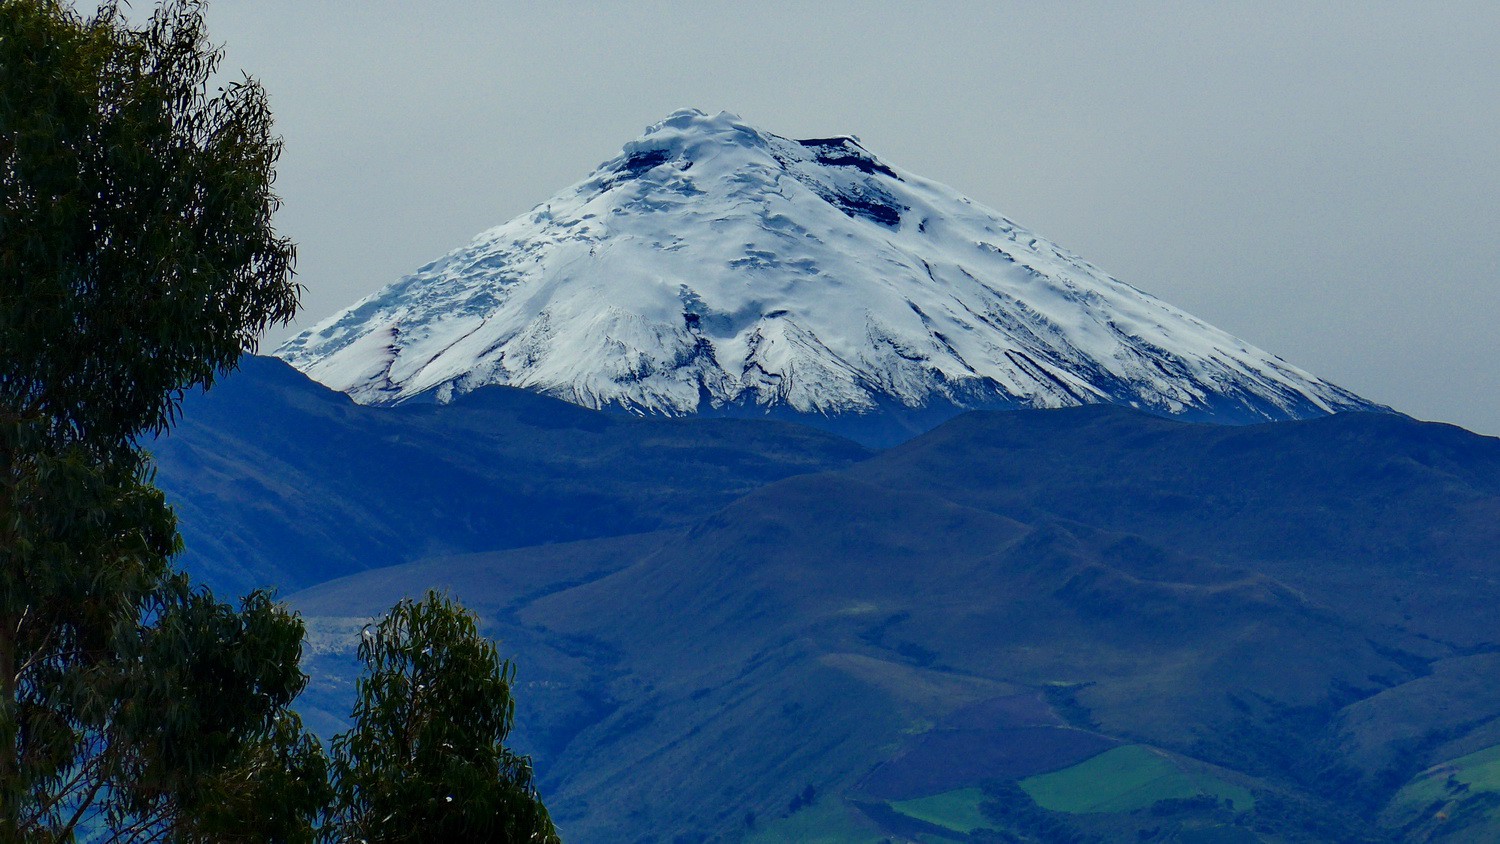 Cotopaxi seen from the way to the basecamp of Corazon